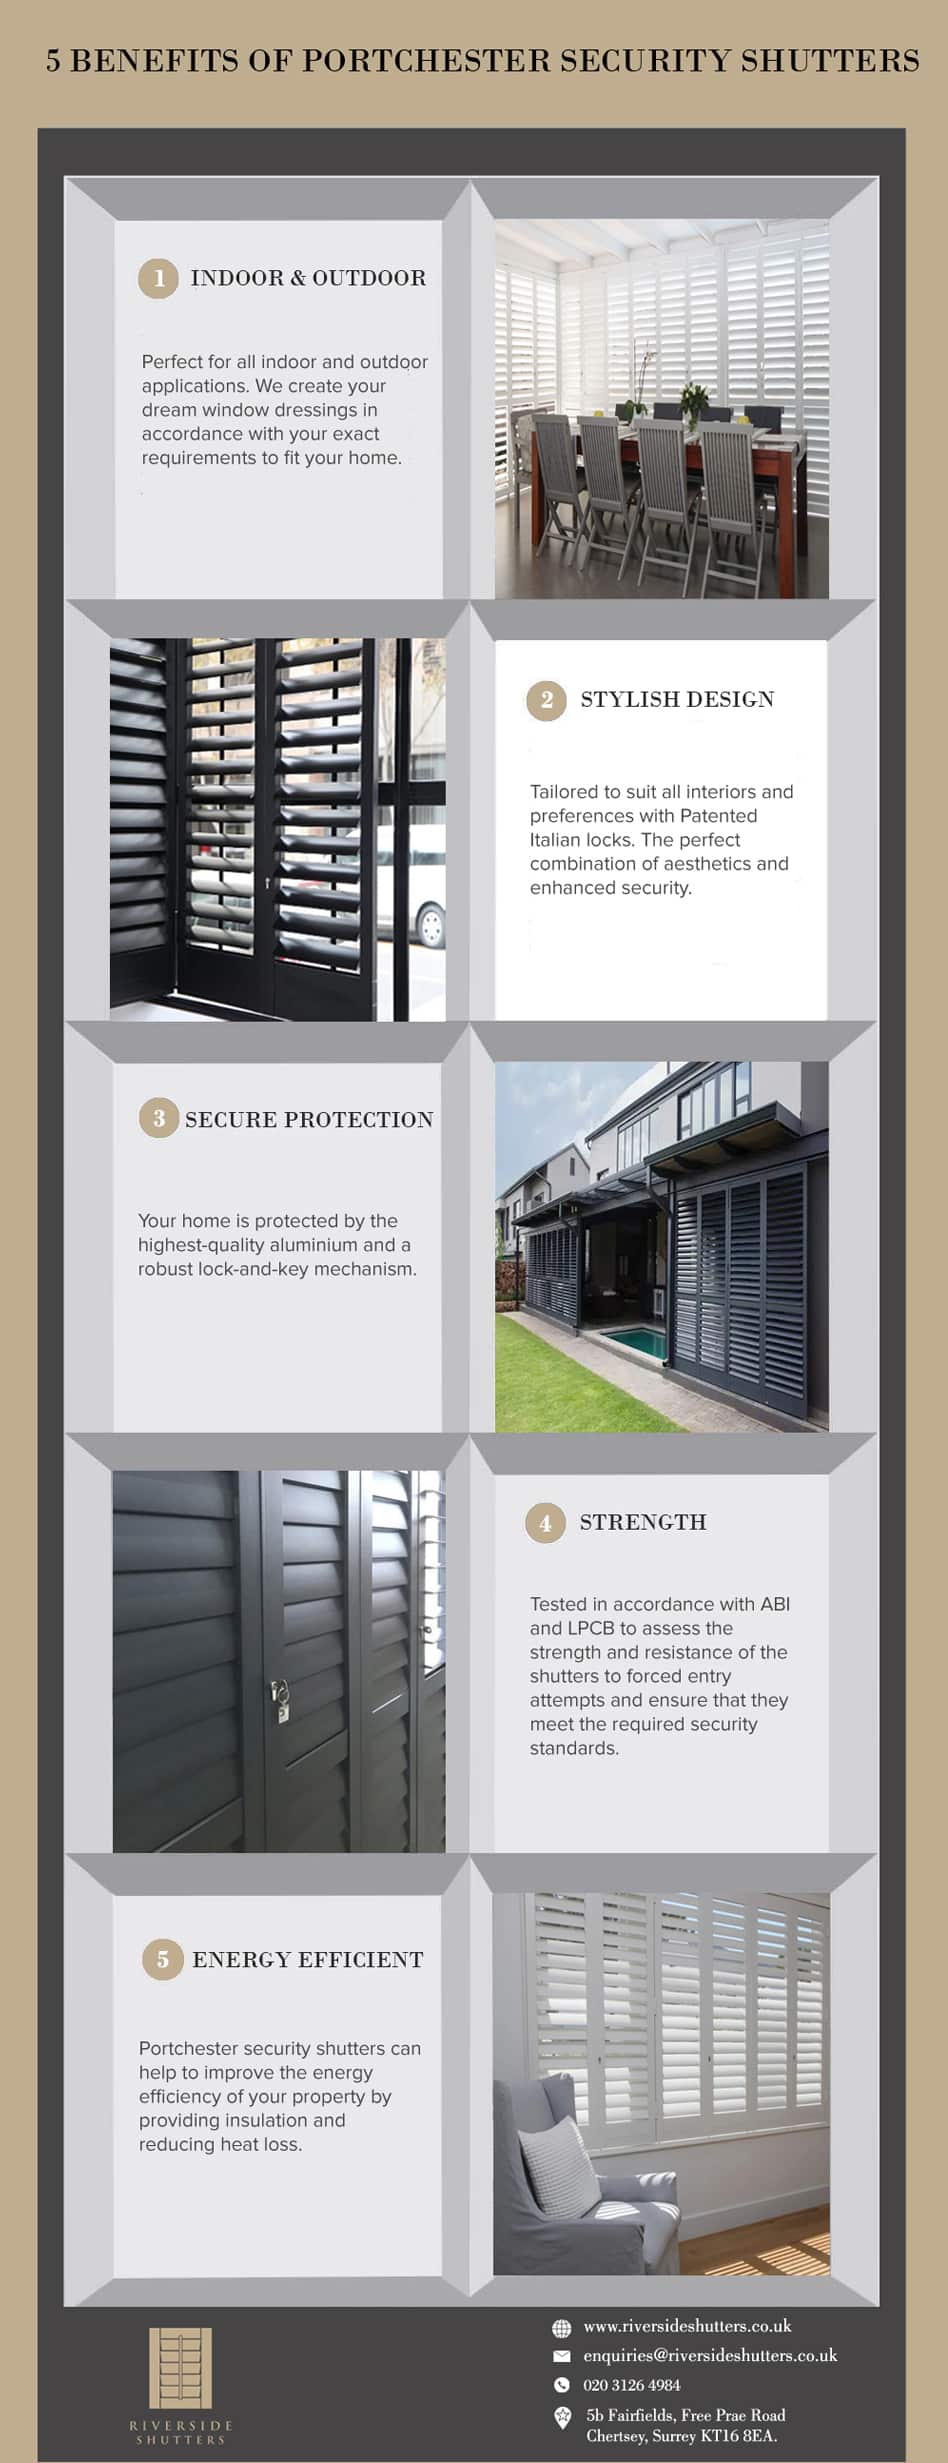 Portchester security shutters infographic